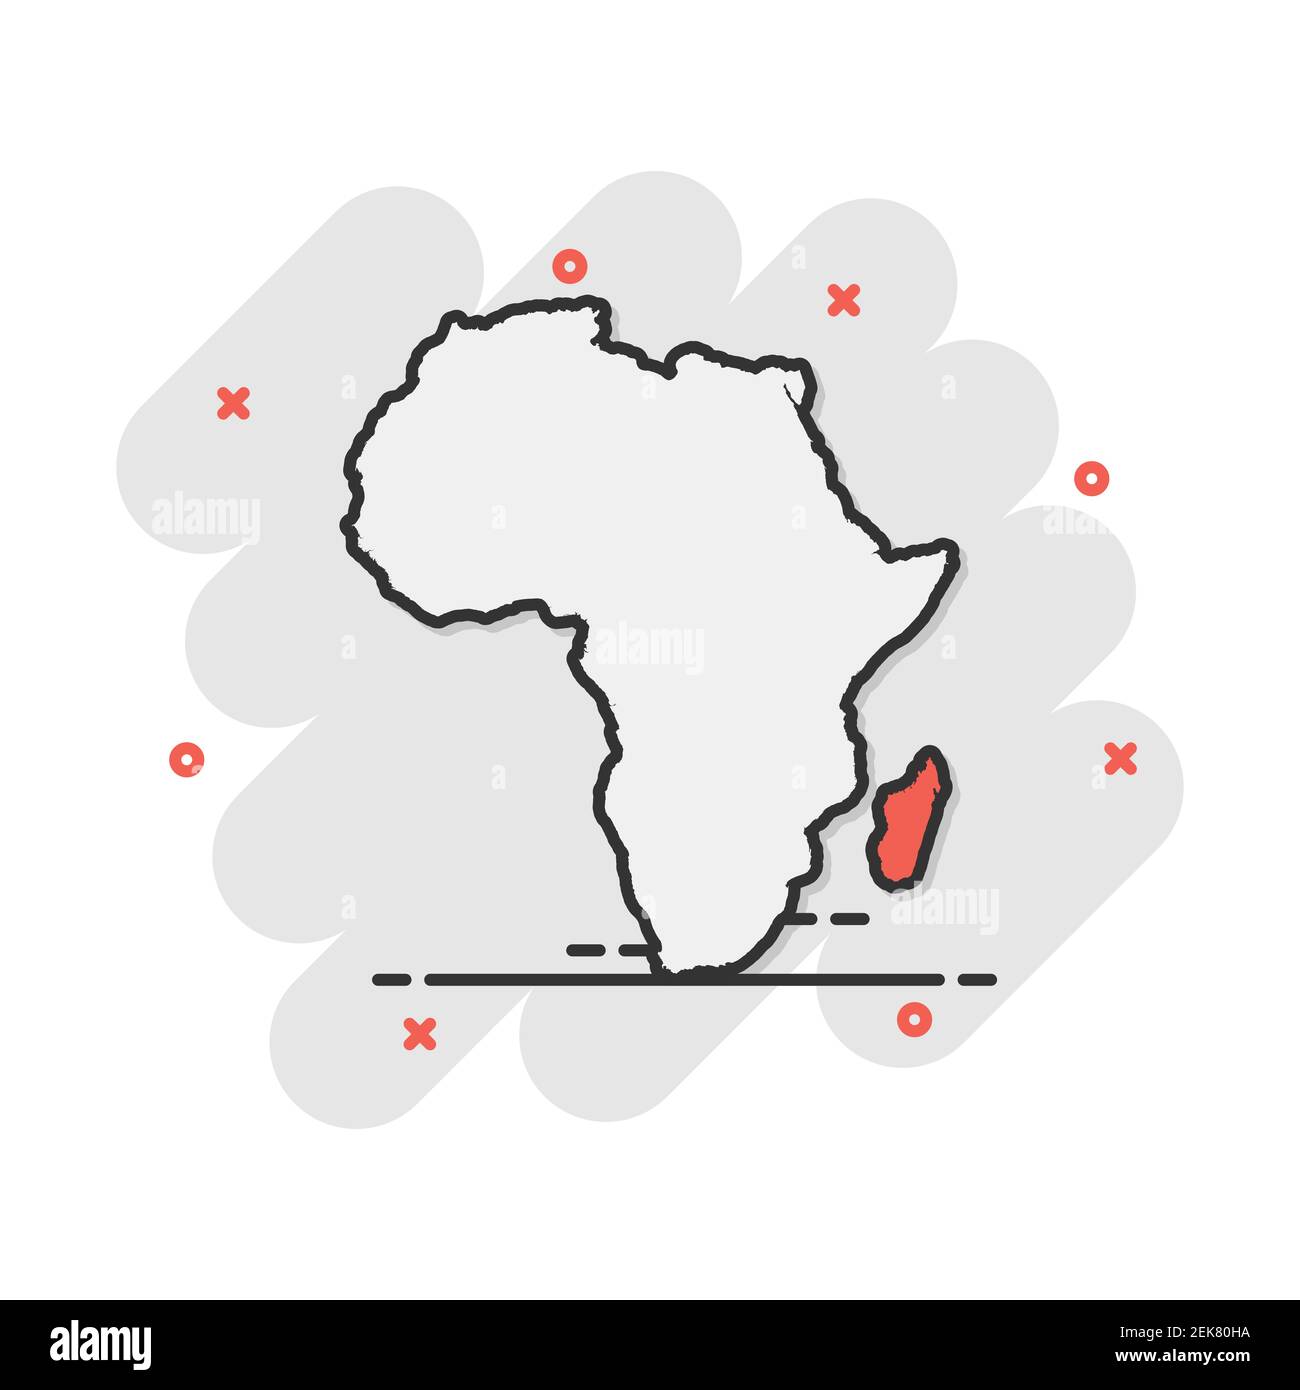 Cartoon Africa map icon in comic style. Atlas illustration pictogram. Country geography sign splash business concept. Stock Vector